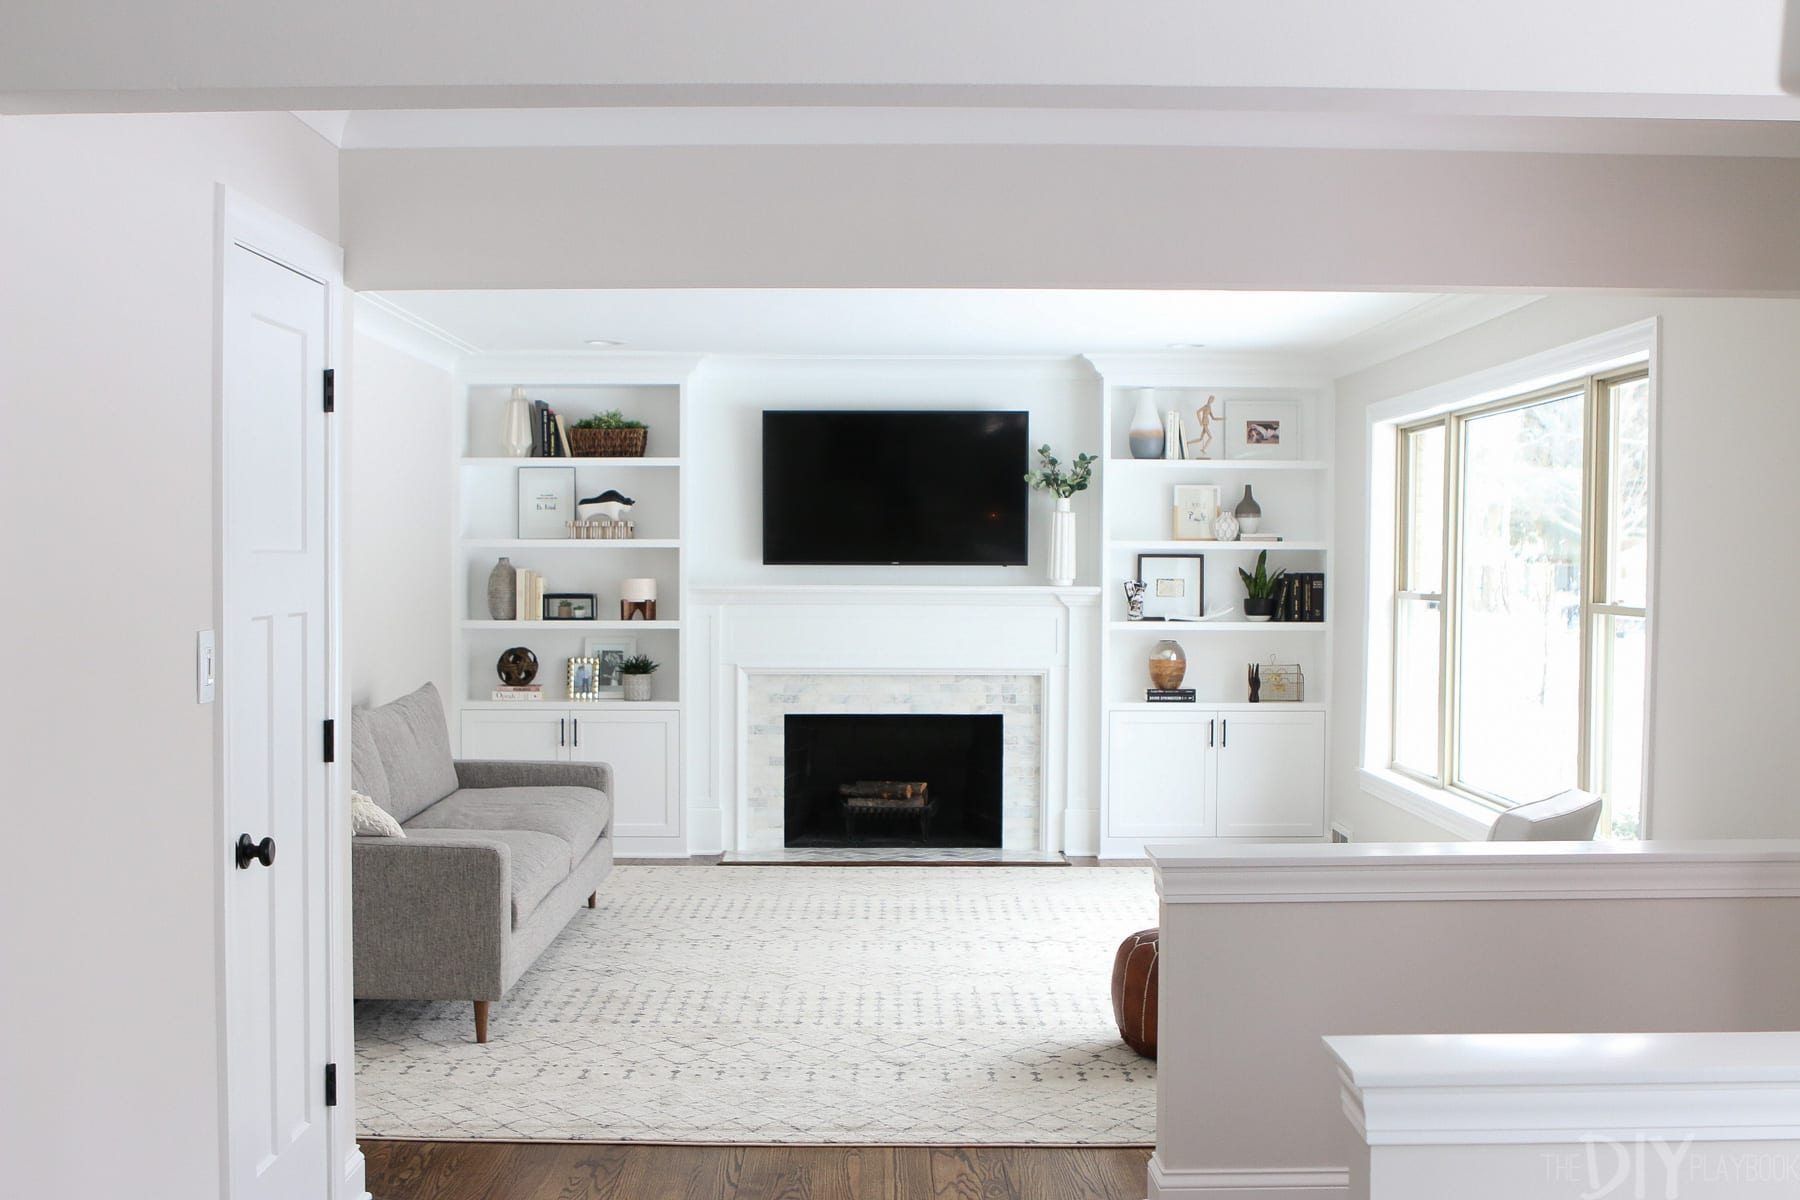 White Built Ins Around The Fireplace, Fireplace With Book Shelves